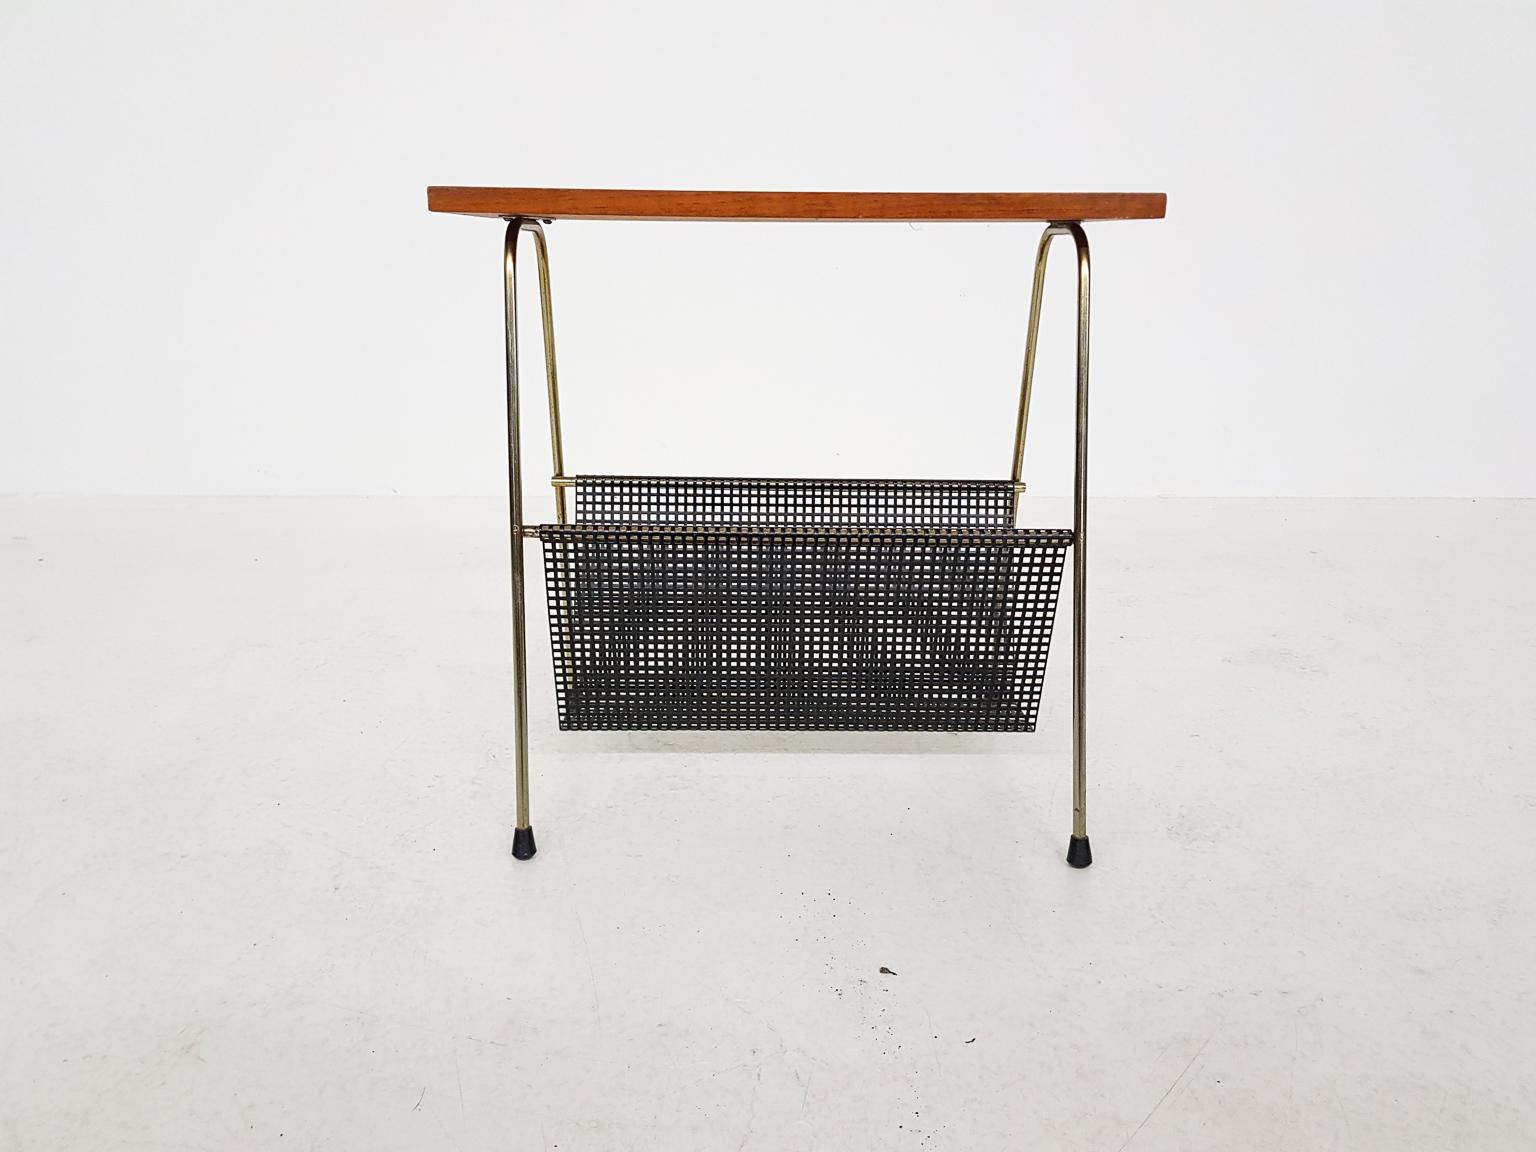 Nice side table or magazine rack. It has many similarities with the TM series side tables or magazine racks by Cees Braakman for Pastoe the Netherlands.

Cees Braakman was a Dutch furniture designer who worked for UMS Pastoe in the midcentury. He